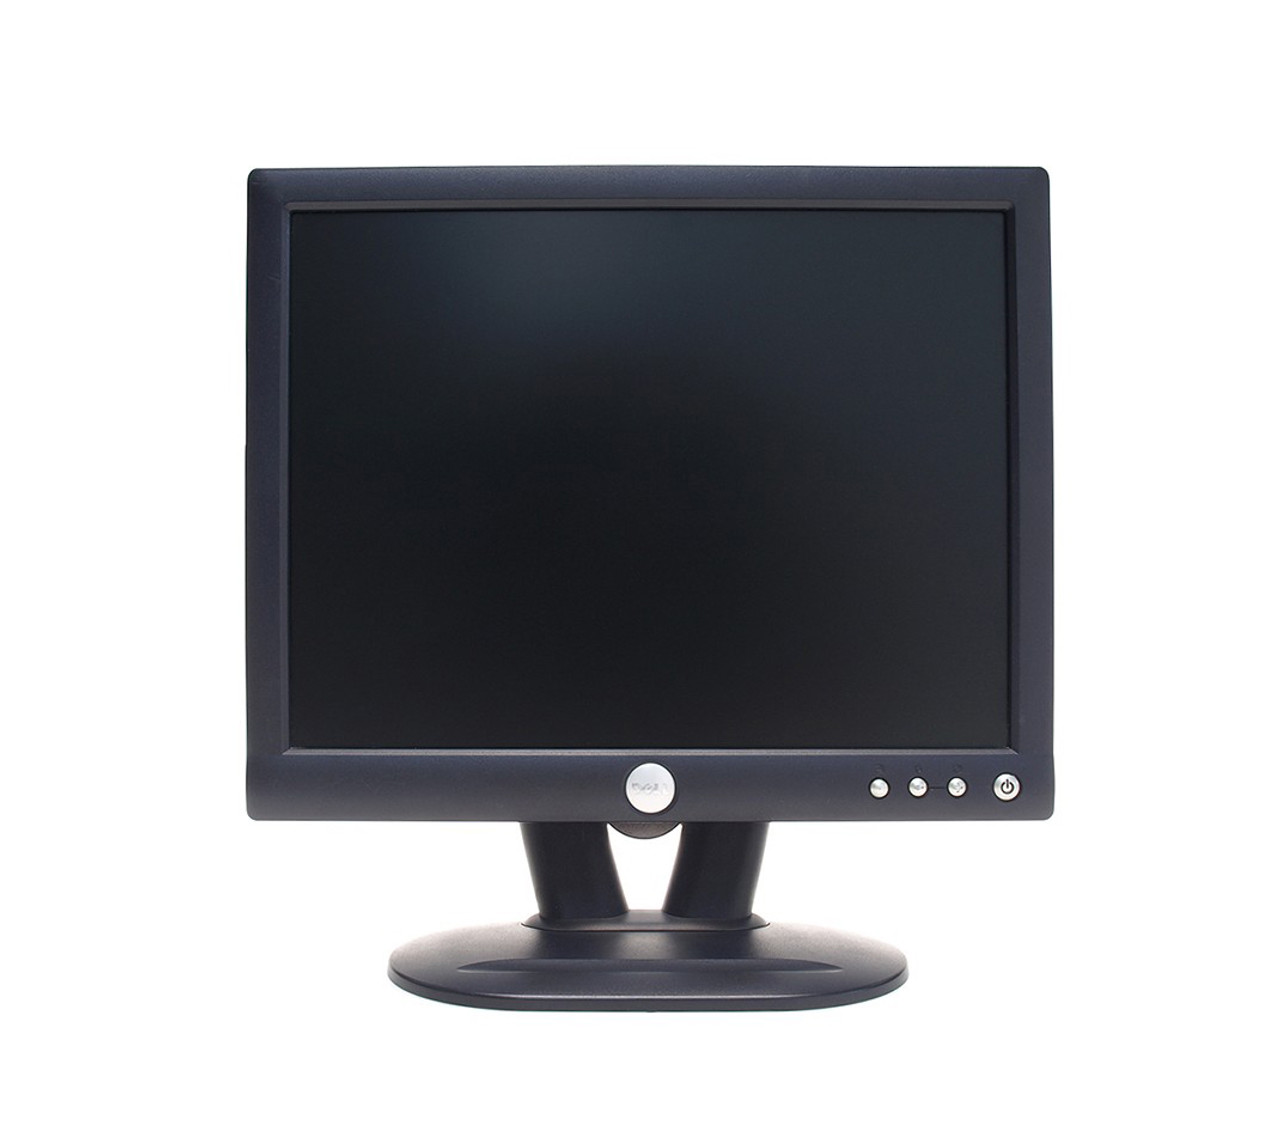 E153FPF - Dell 15-inch 1024 x 768 at 75Hz TFT Flat Panel LCD Monitor (Refurbished)